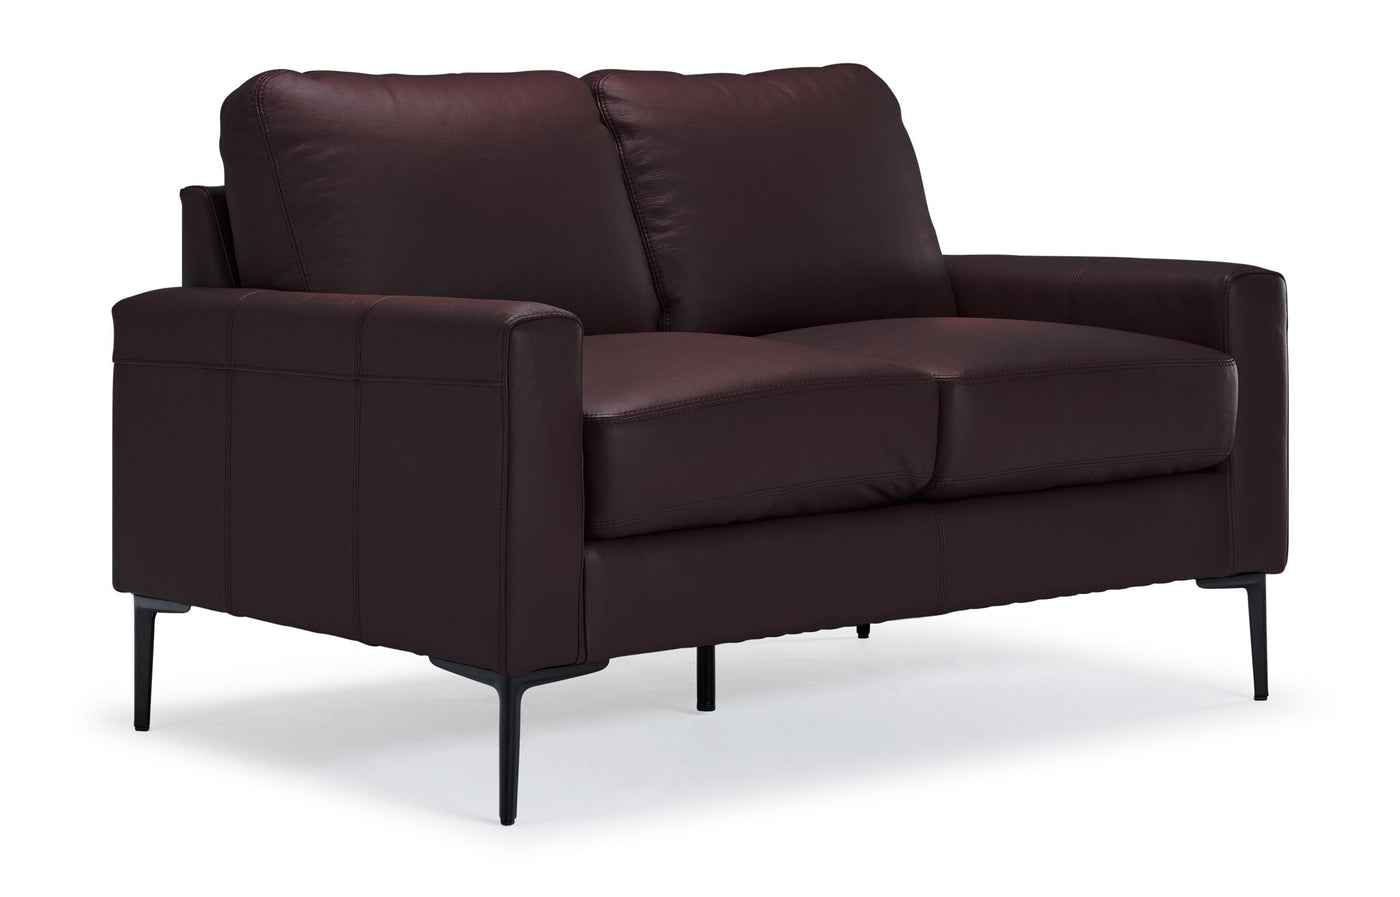 Chito Leather Sofa, Loveseat and Chair Set - Mocha